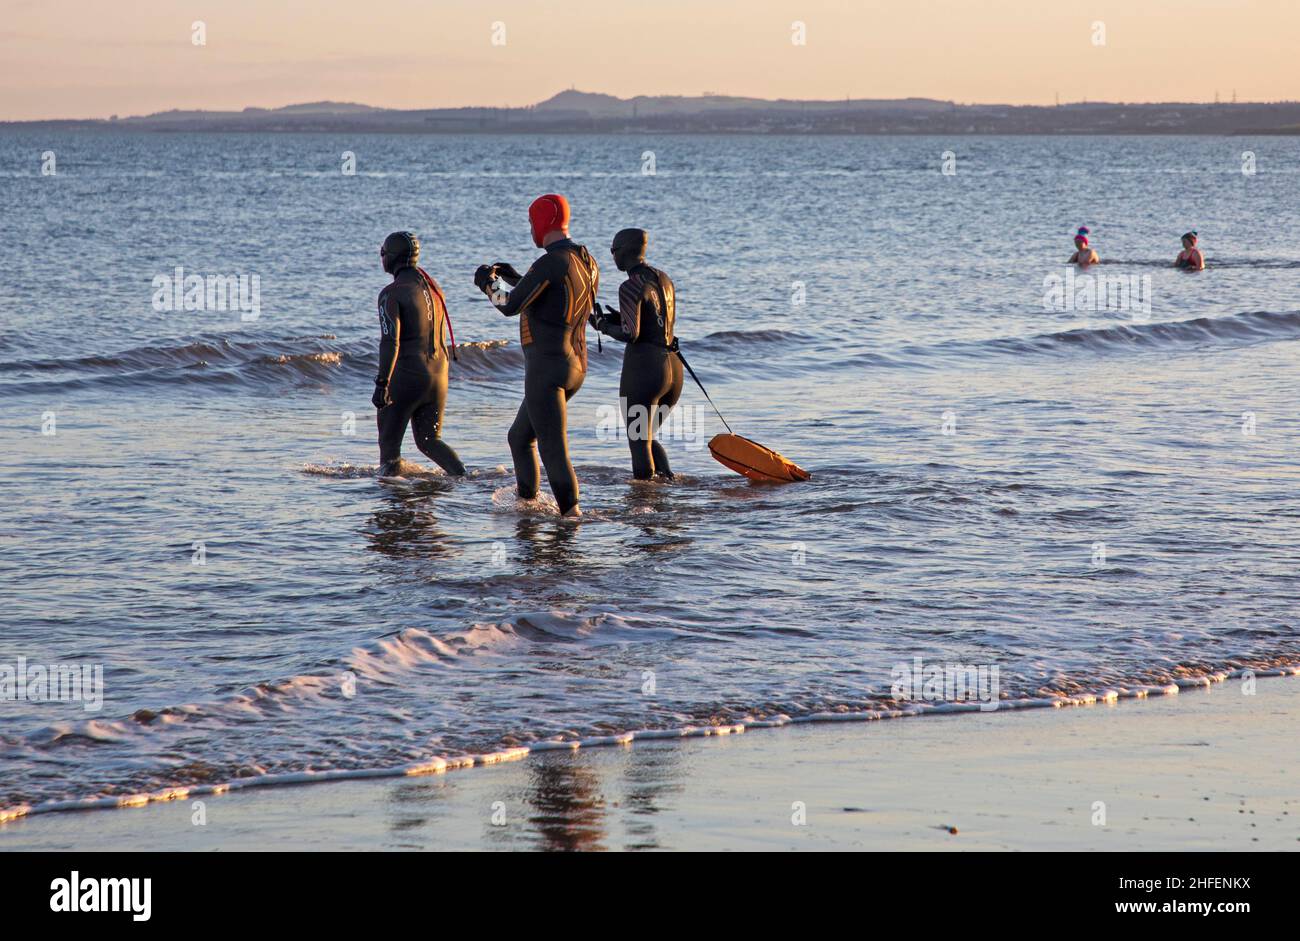 Portobello, Edinburgh, Scotland, UK. 16th January 2022. Finally sunrise sunshine with temperature of 7 degrees after a week of heavy cloud in the skies above the city. Pictured: Friends in wetsuits head into the chilly Firth of Forth for a swim. Credit: Scottishcreative/Alamy Live News. Stock Photo